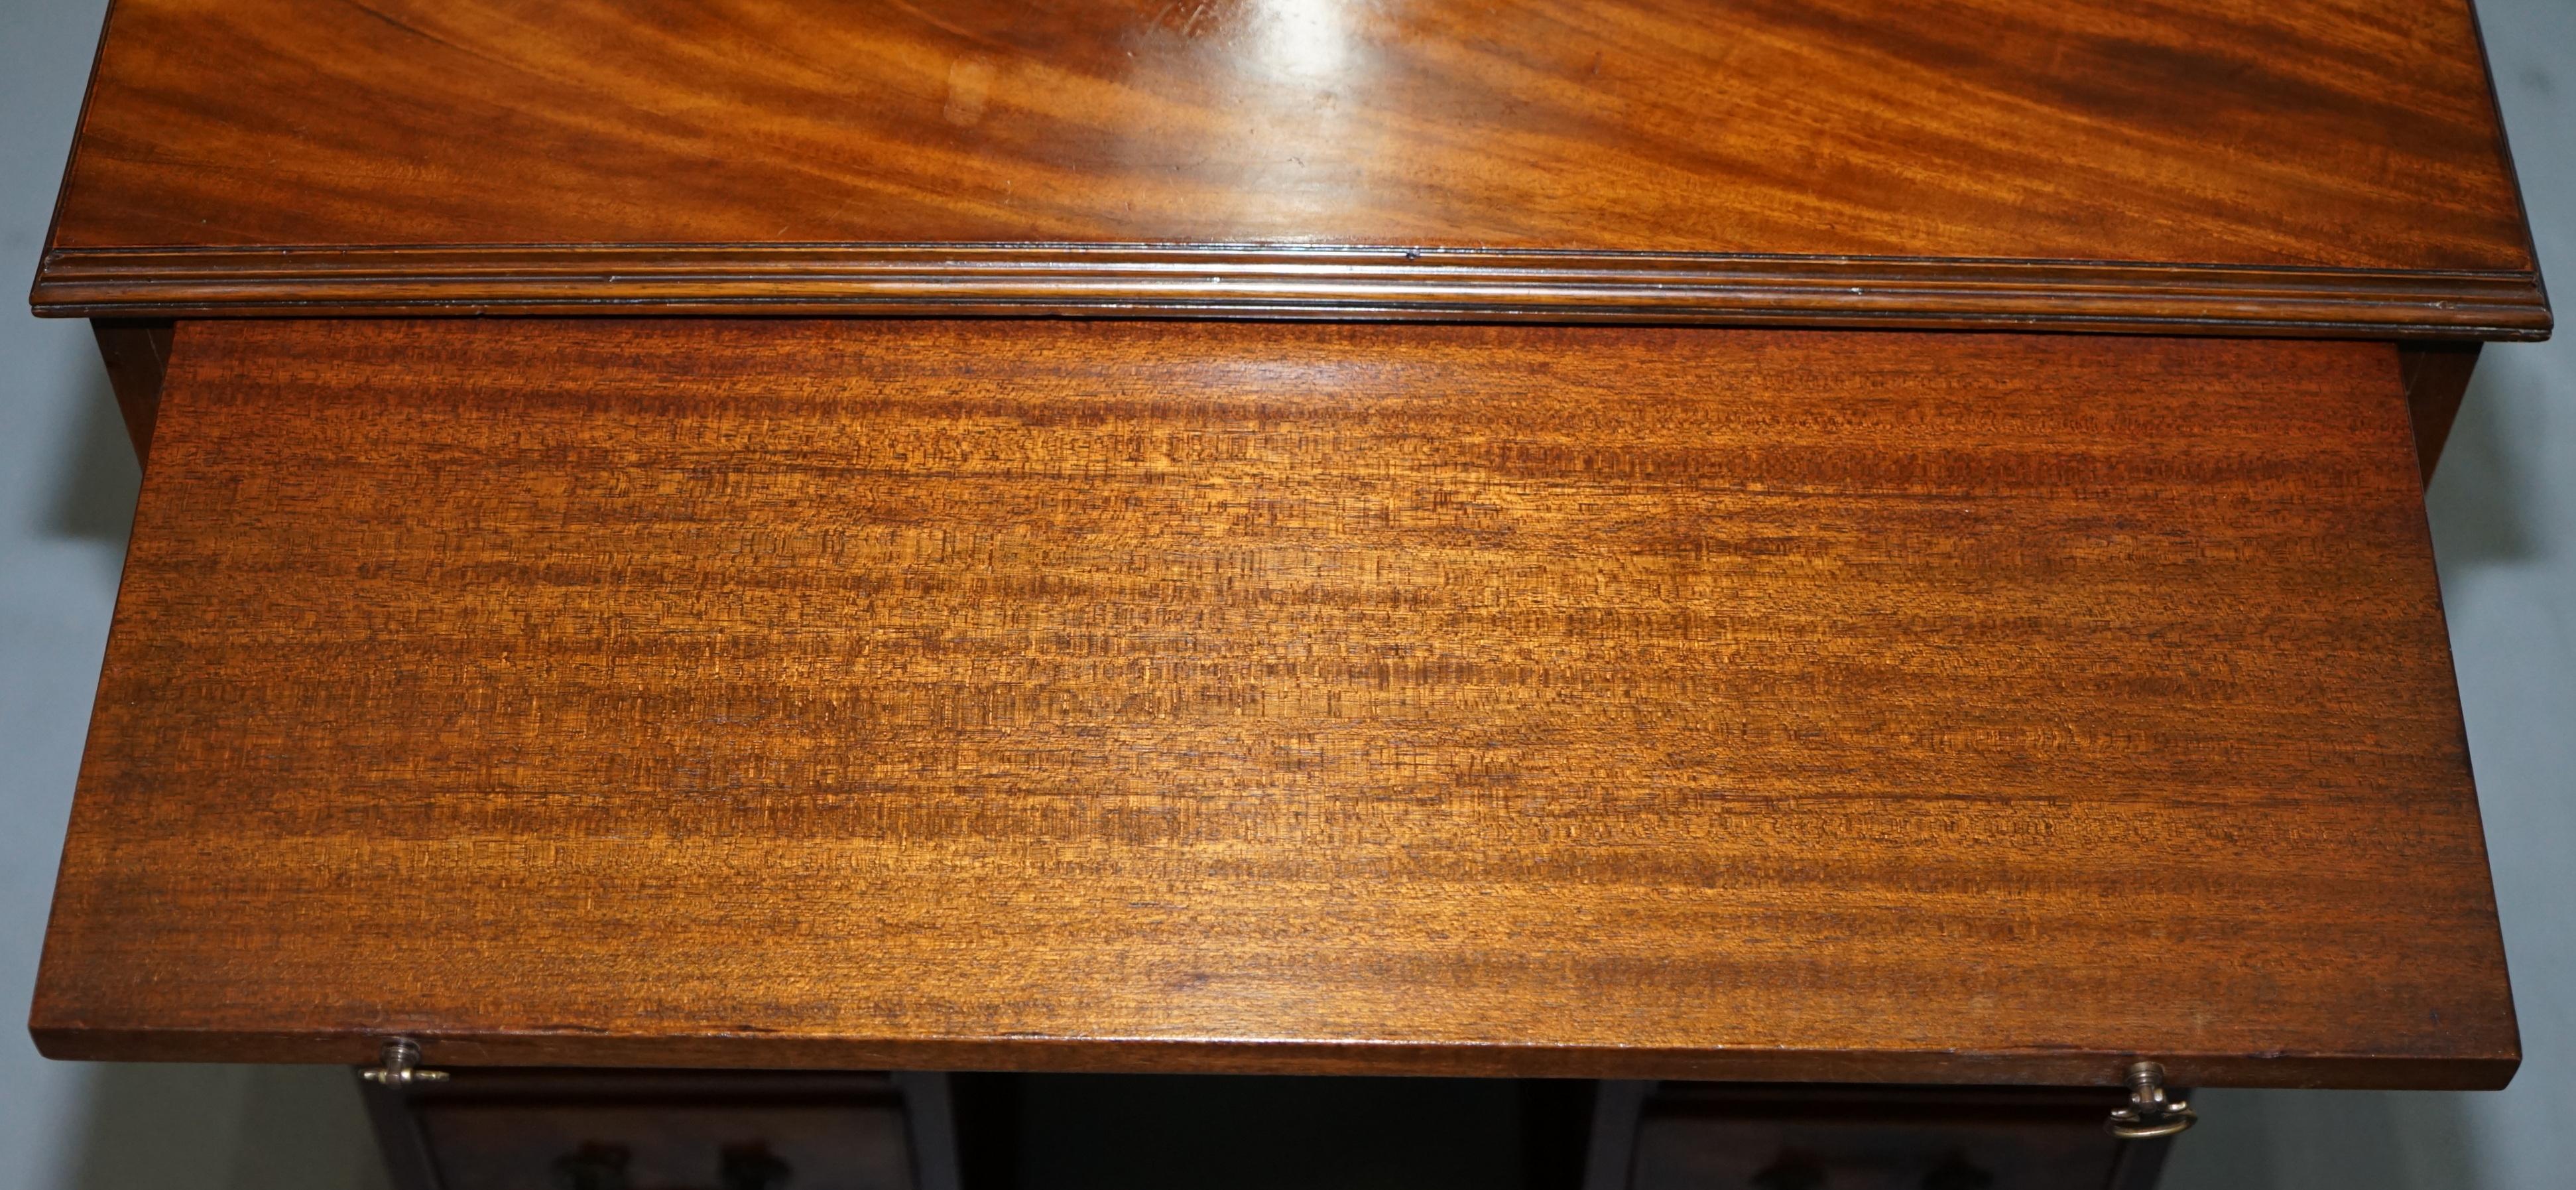 Early Georgian 1800s Flamed Hardwood Knee Hole Desk Pull Out Writing Surface 12